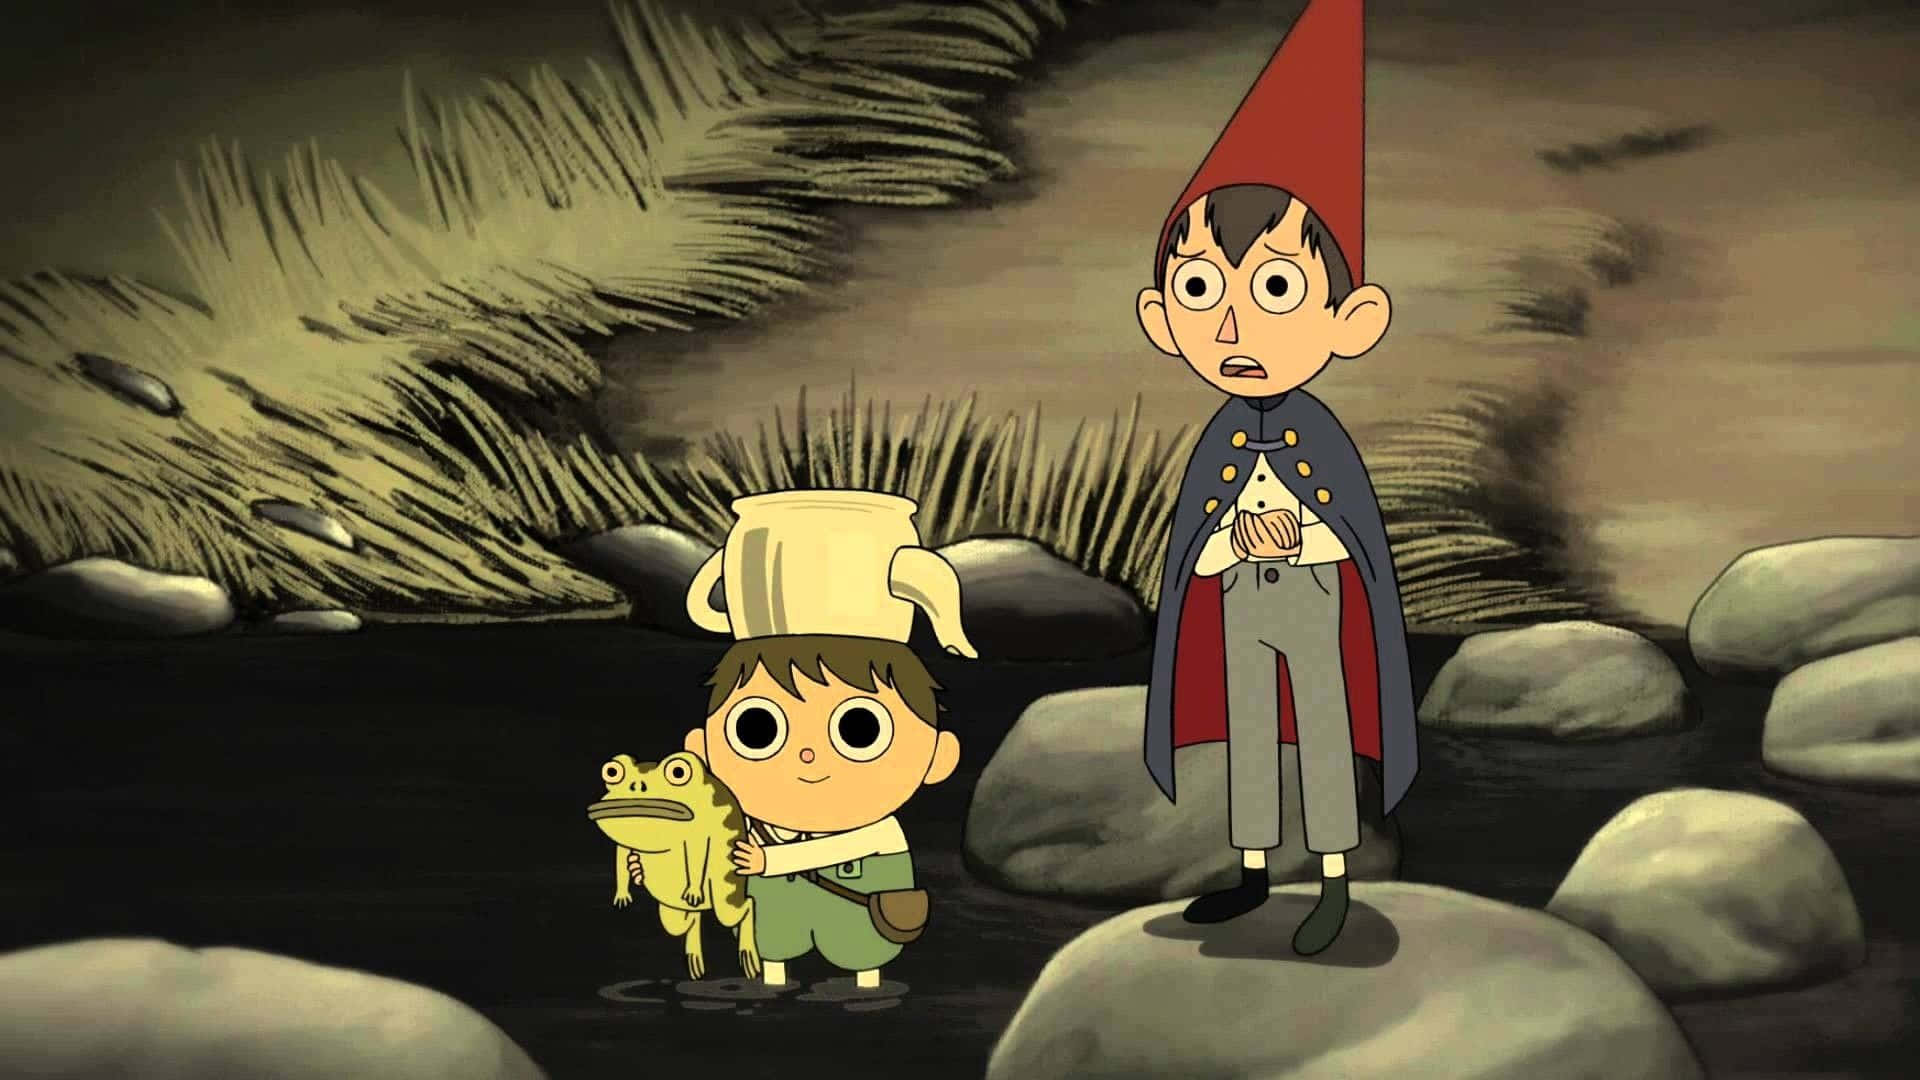 Wirt and Greg in their journey Over the Garden Wall